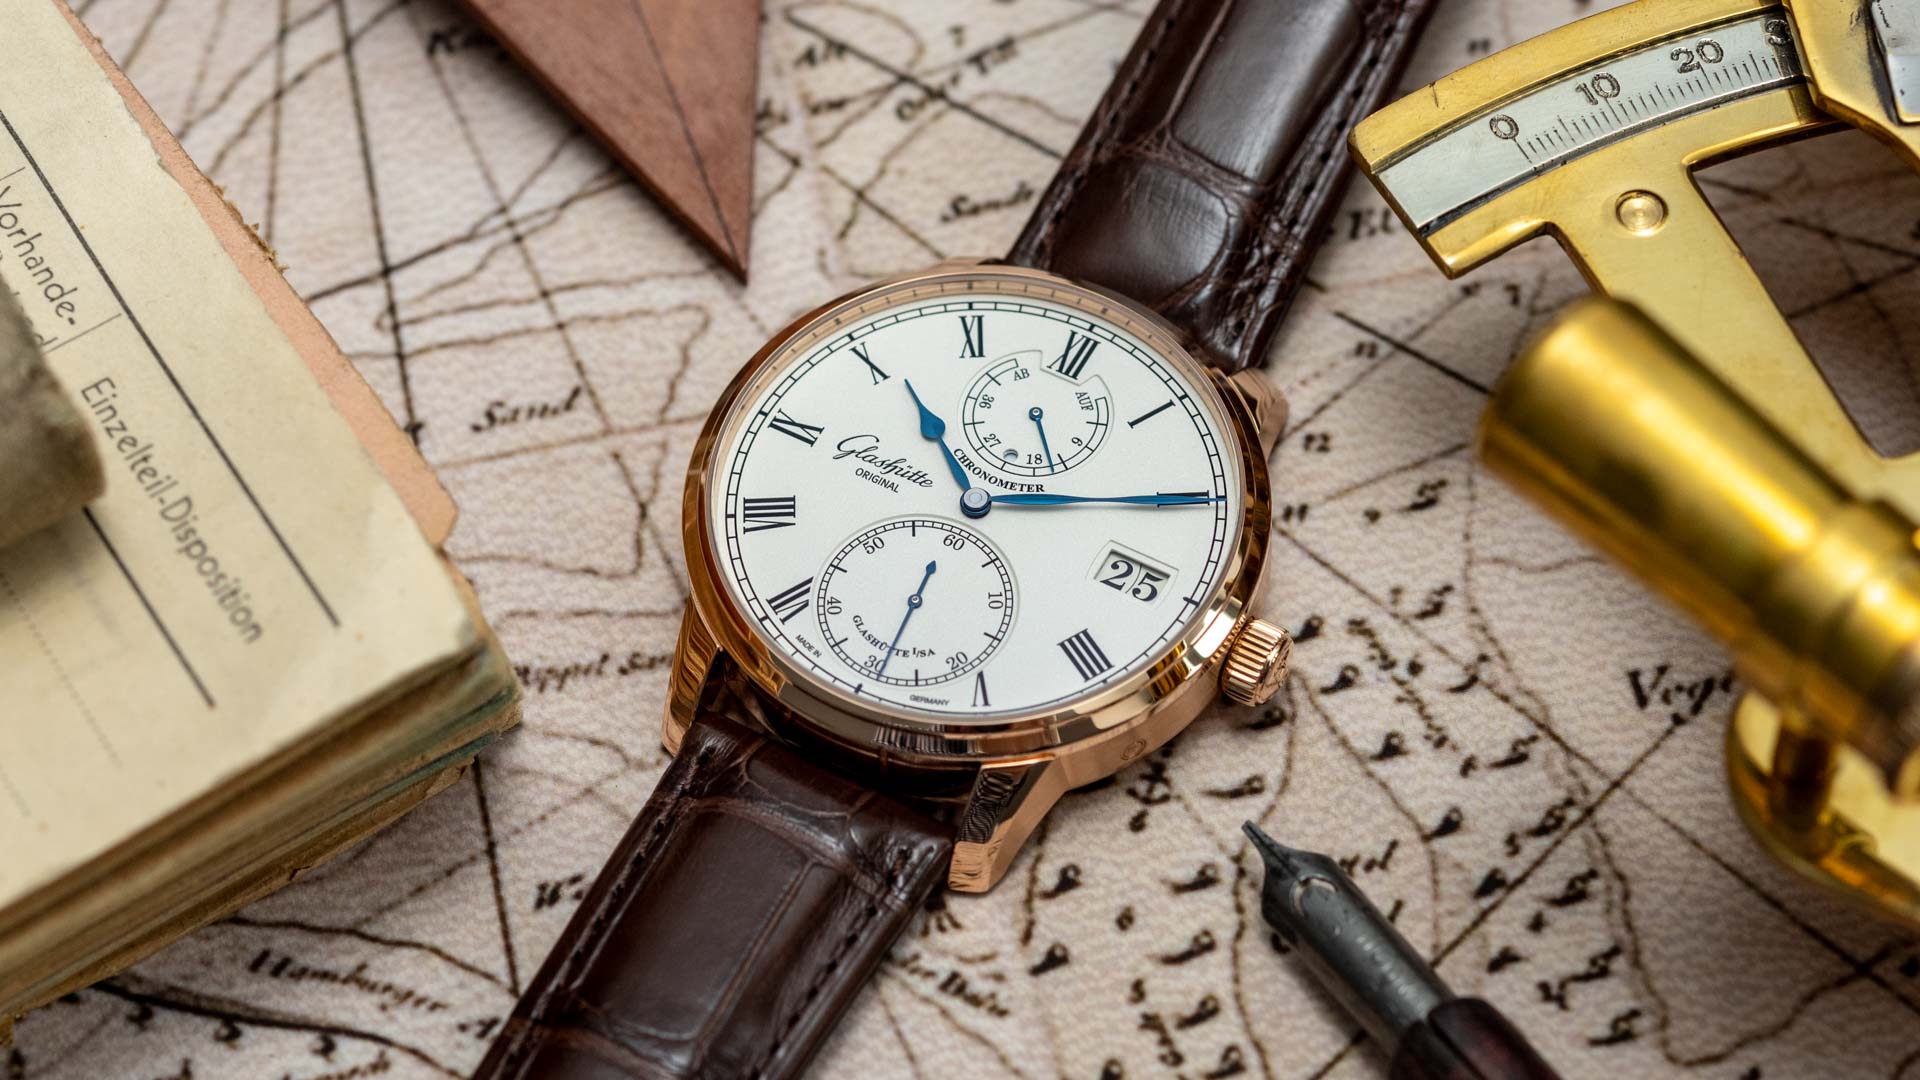 Keeping Accurate Time With The Certified Glashütte Original Senator Chronometer